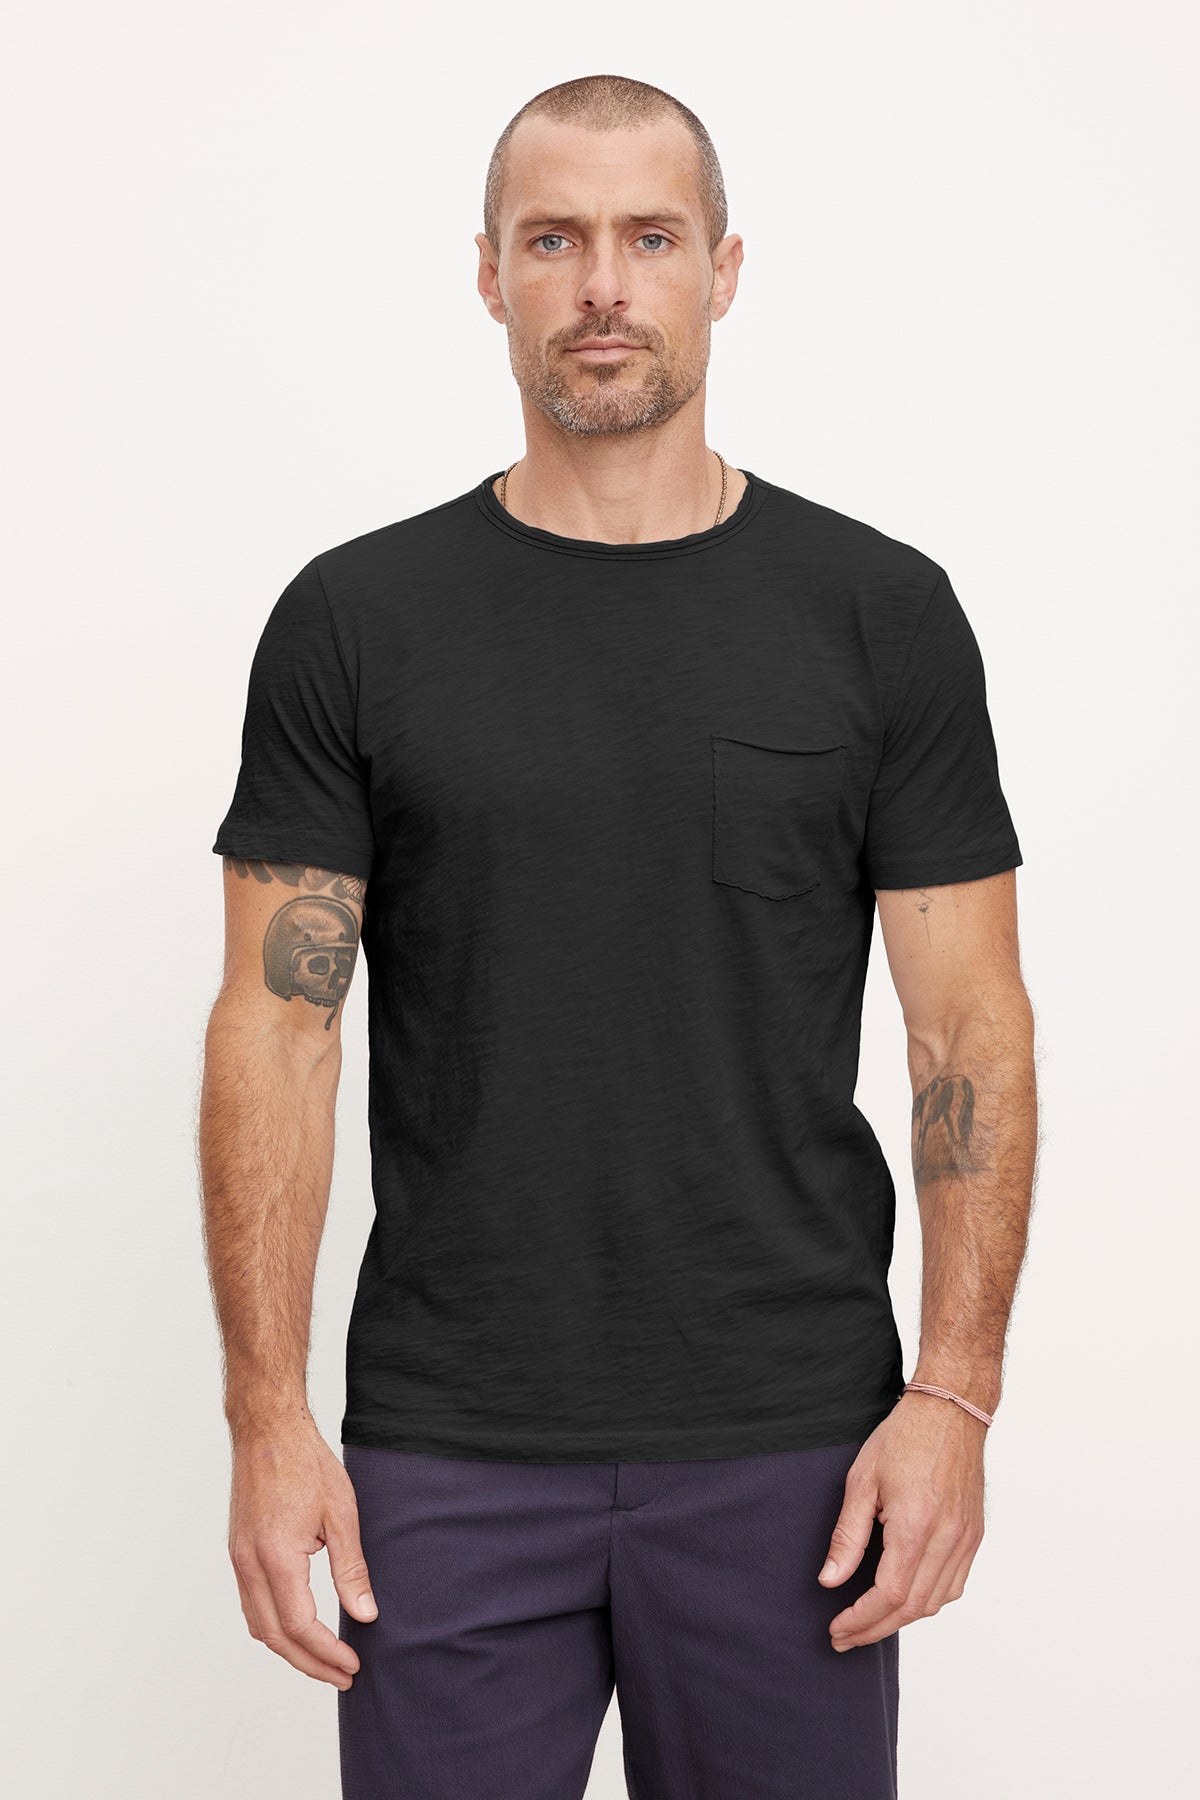   Man in black CHAD TEE with raw-edge details by Velvet by Graham & Spencer and dark trousers, standing straight and looking at the camera, with tattooed arms. 